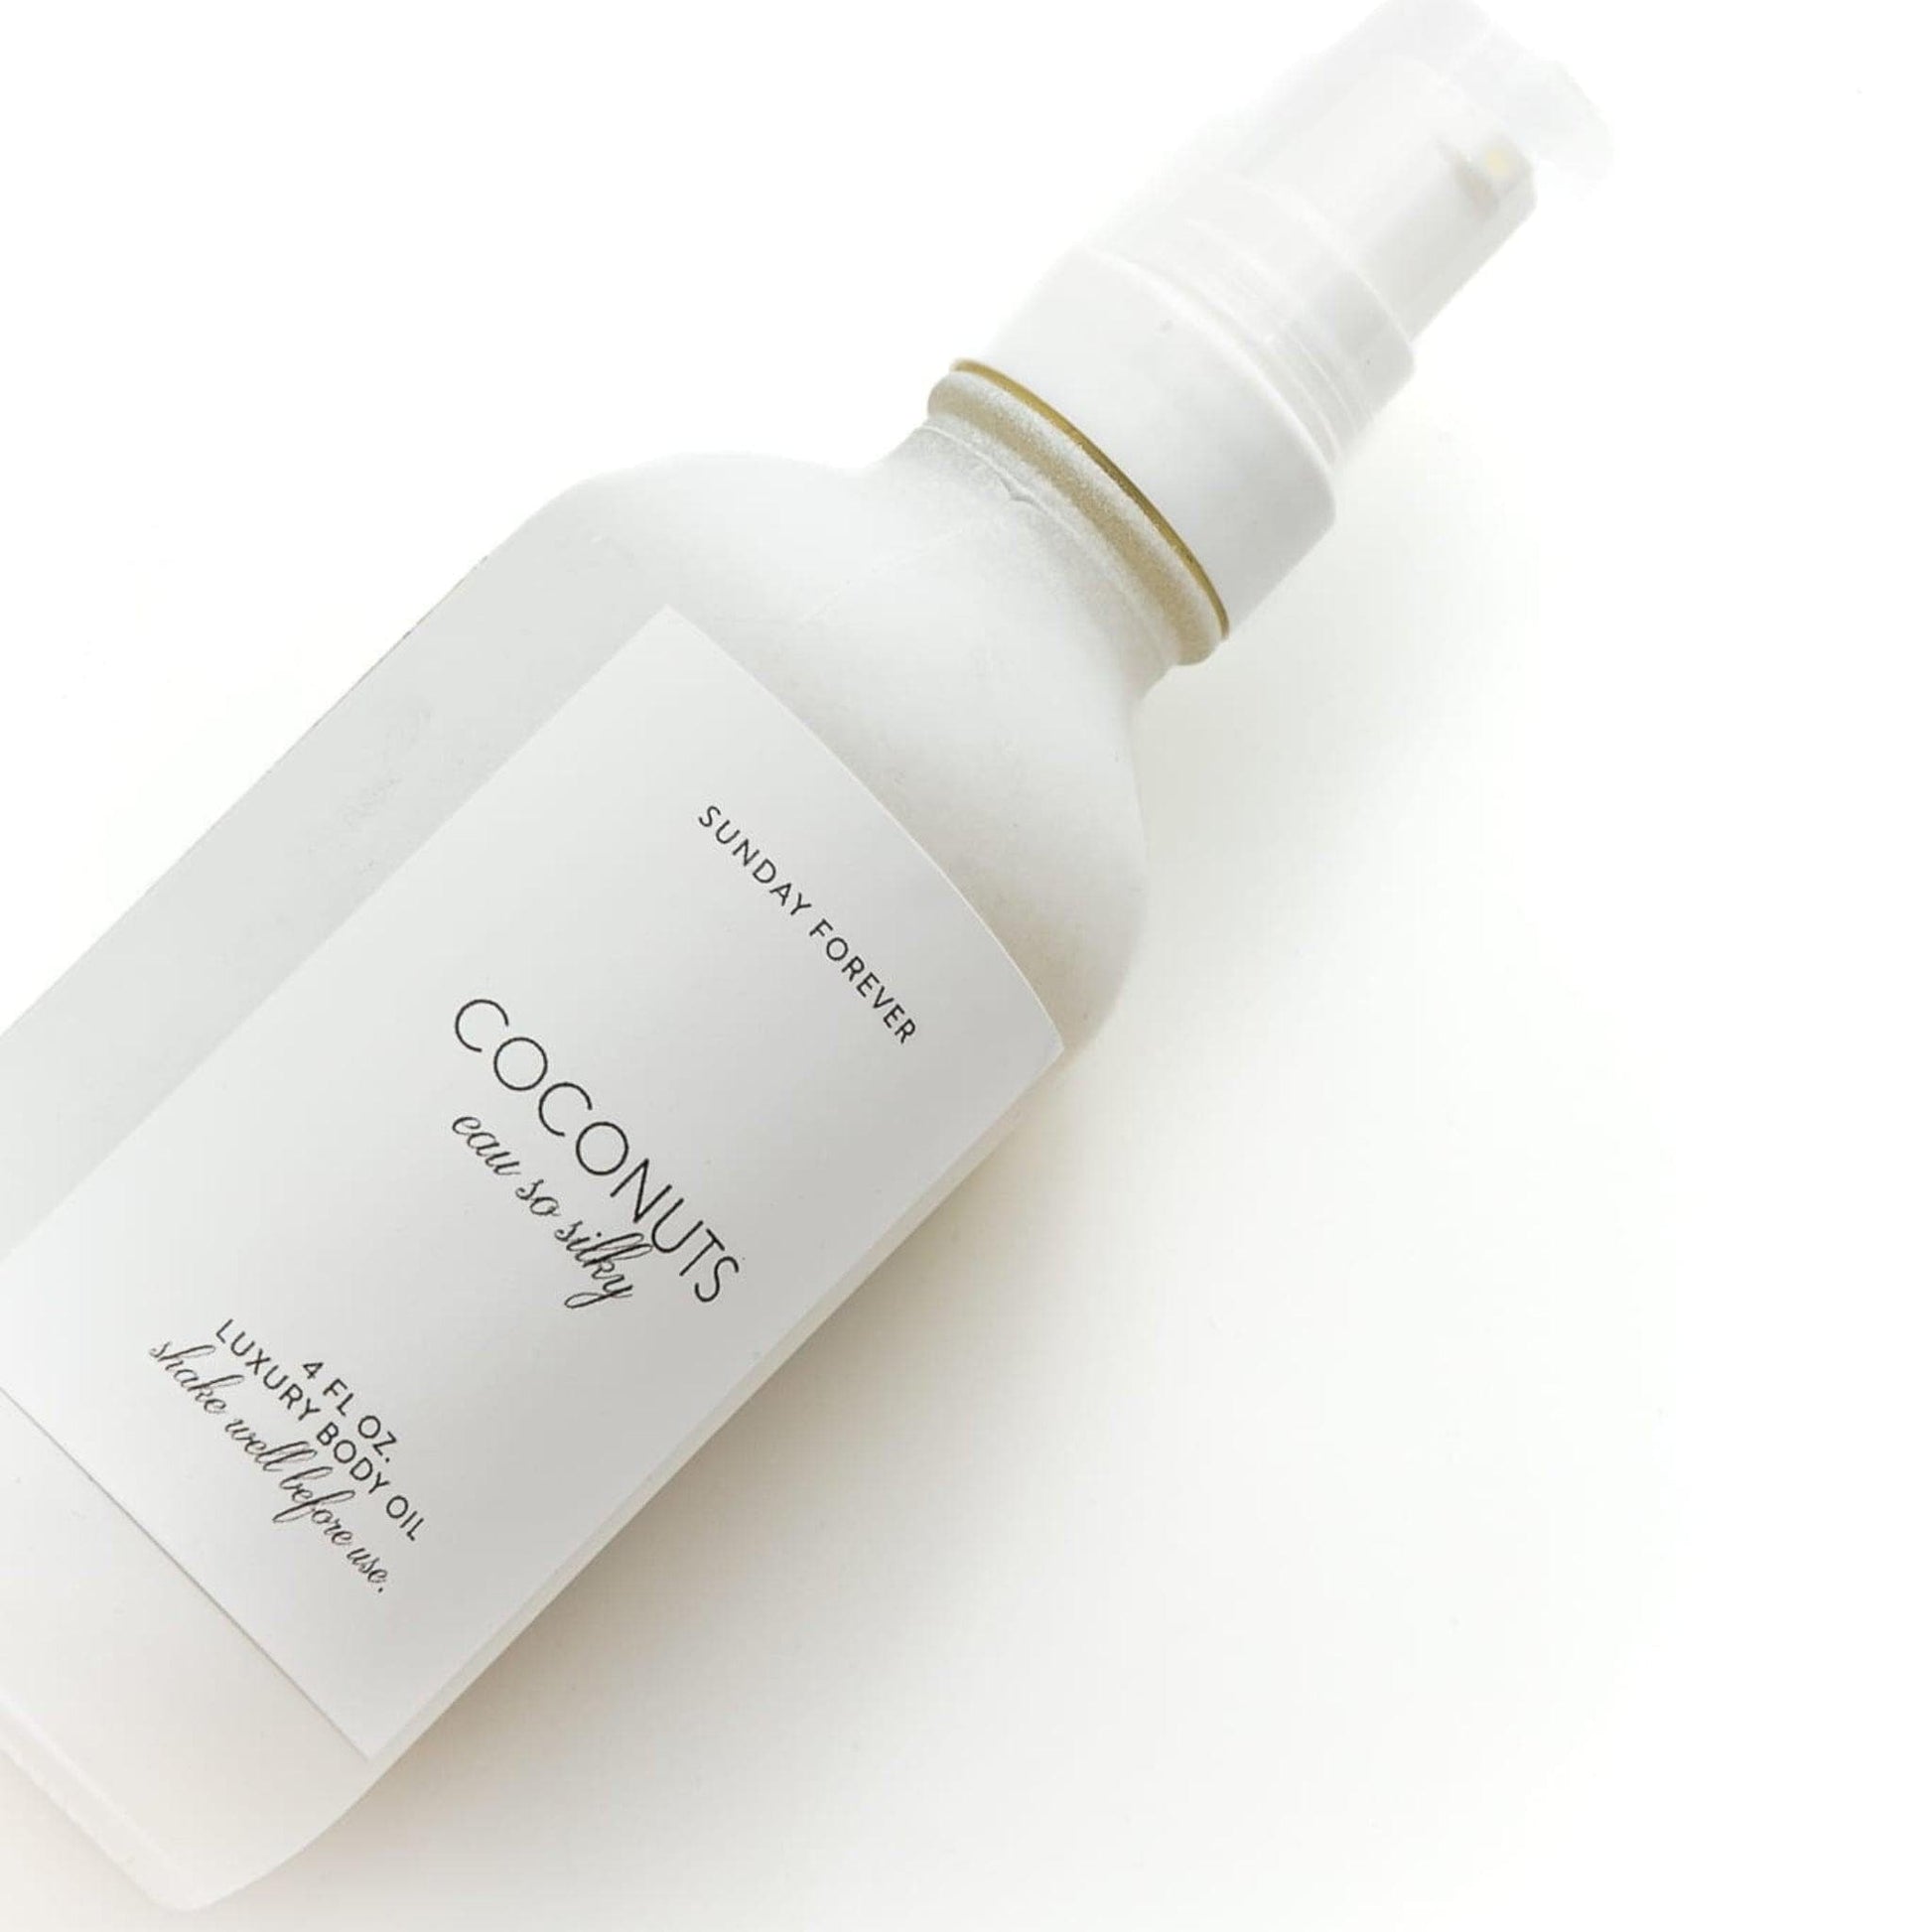 Coconuts Eau So Silky Luxury Body Oil - Coconut-Sunday Forever